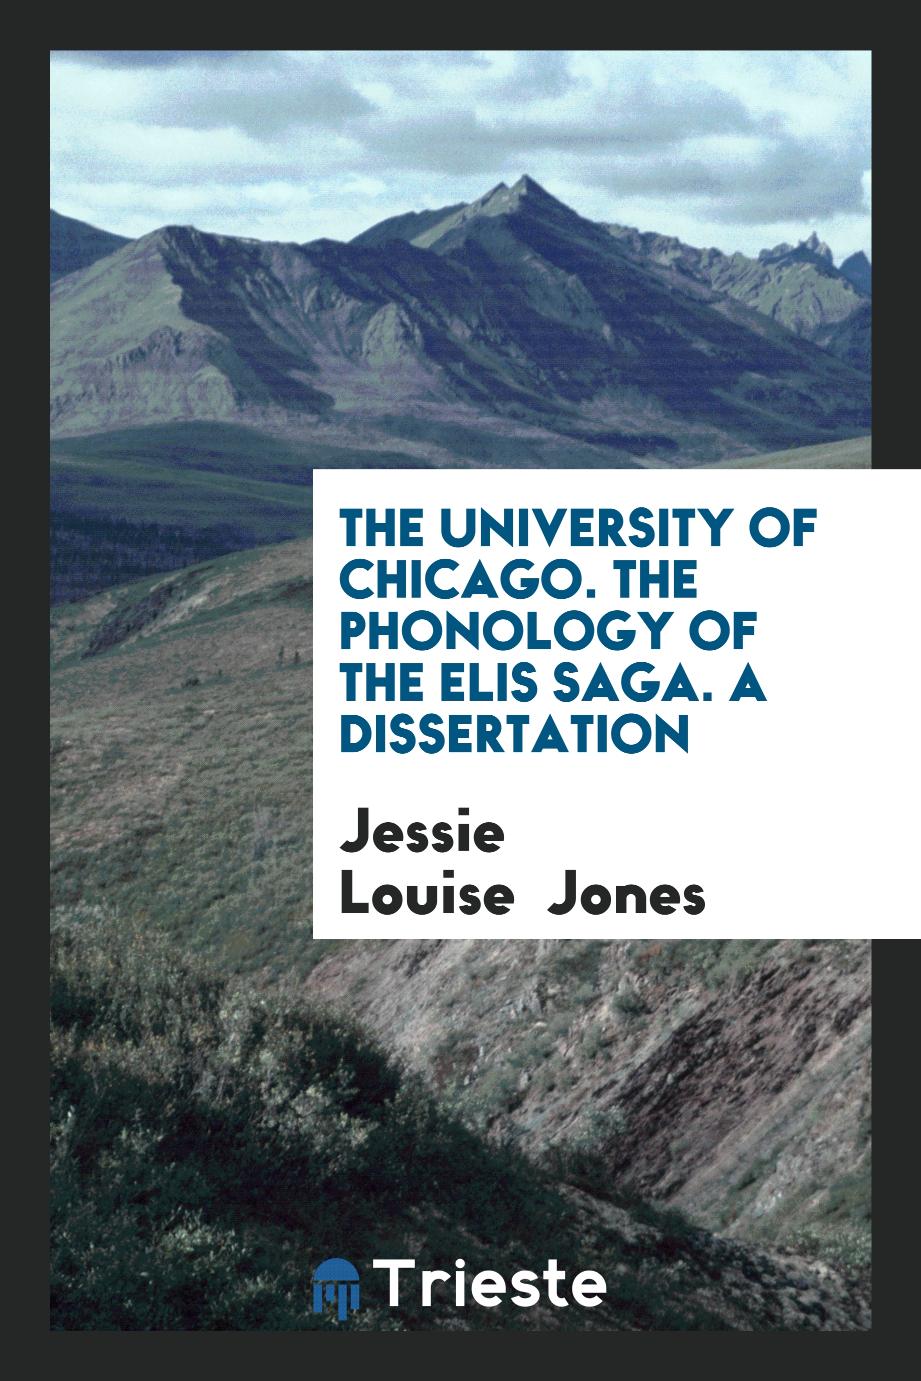 The University of Chicago. The Phonology of the Elis Saga. A dissertation